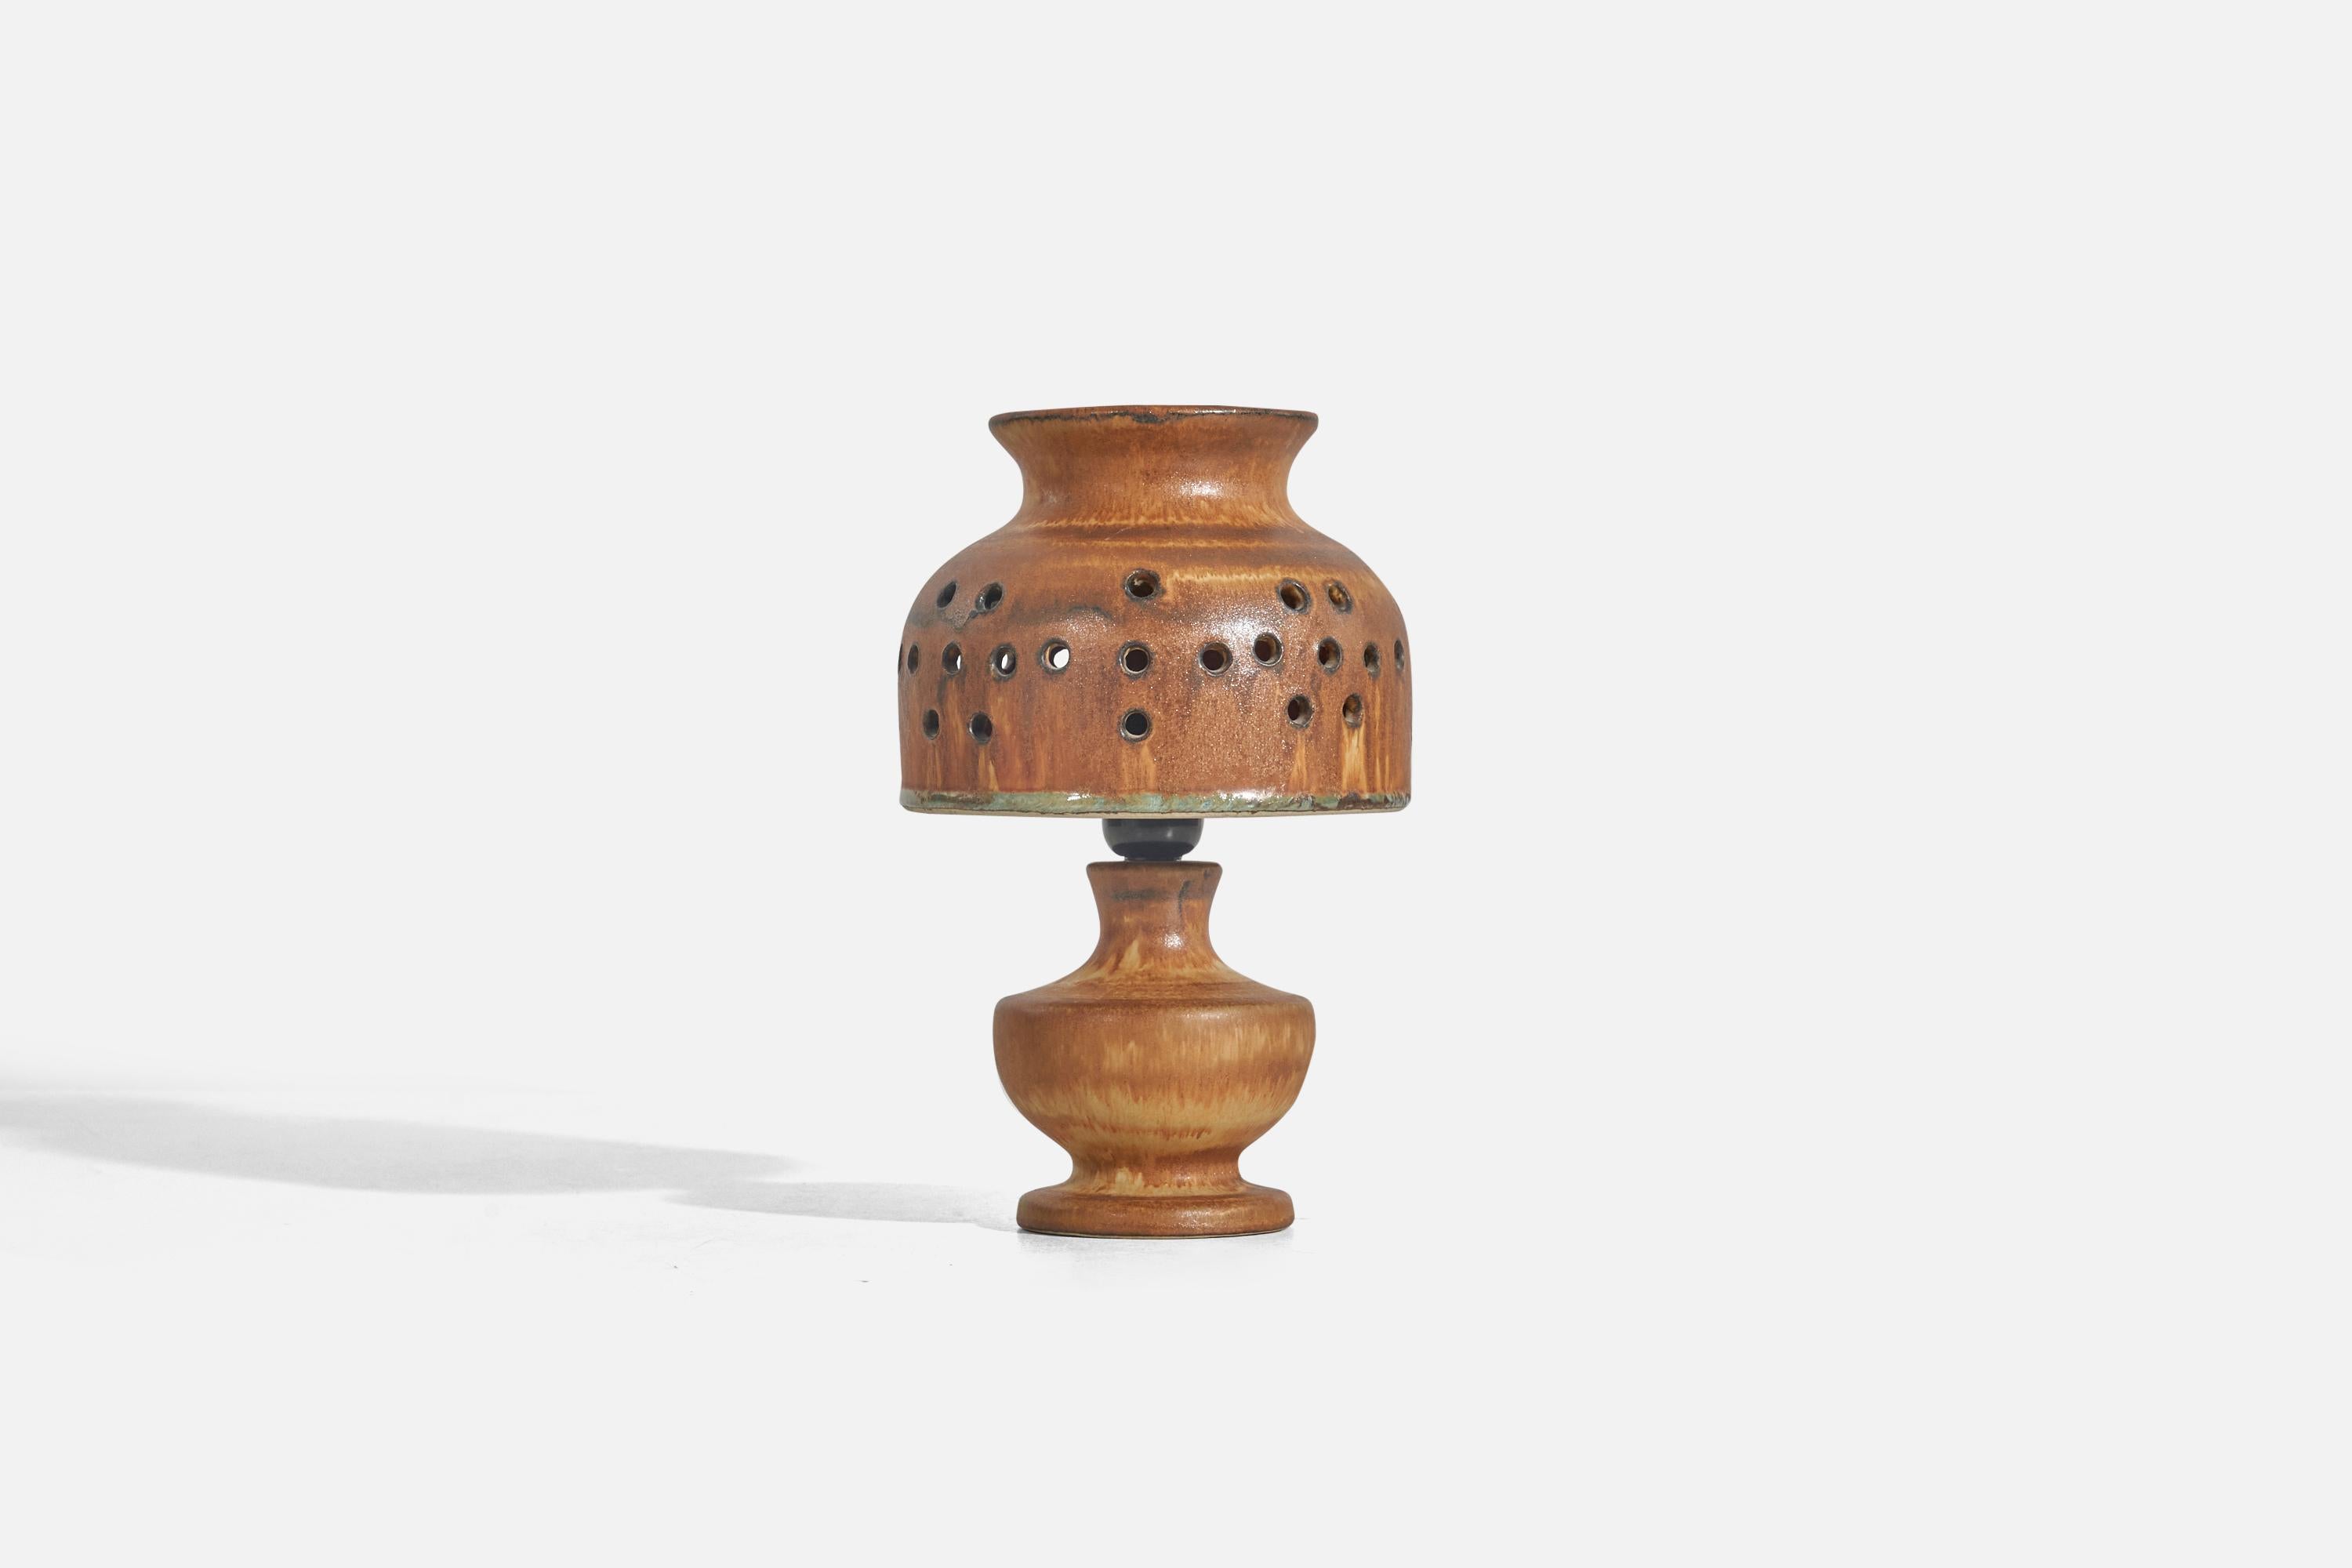 A brown-glazed stoneware table lamp designed by Bruno Karlsson and produced by Ego Stengods, Sweden, c. 1960s.

Socket takes standard E-26 medium base bulb.

There is no maximum wattage stated on the fixture.
 